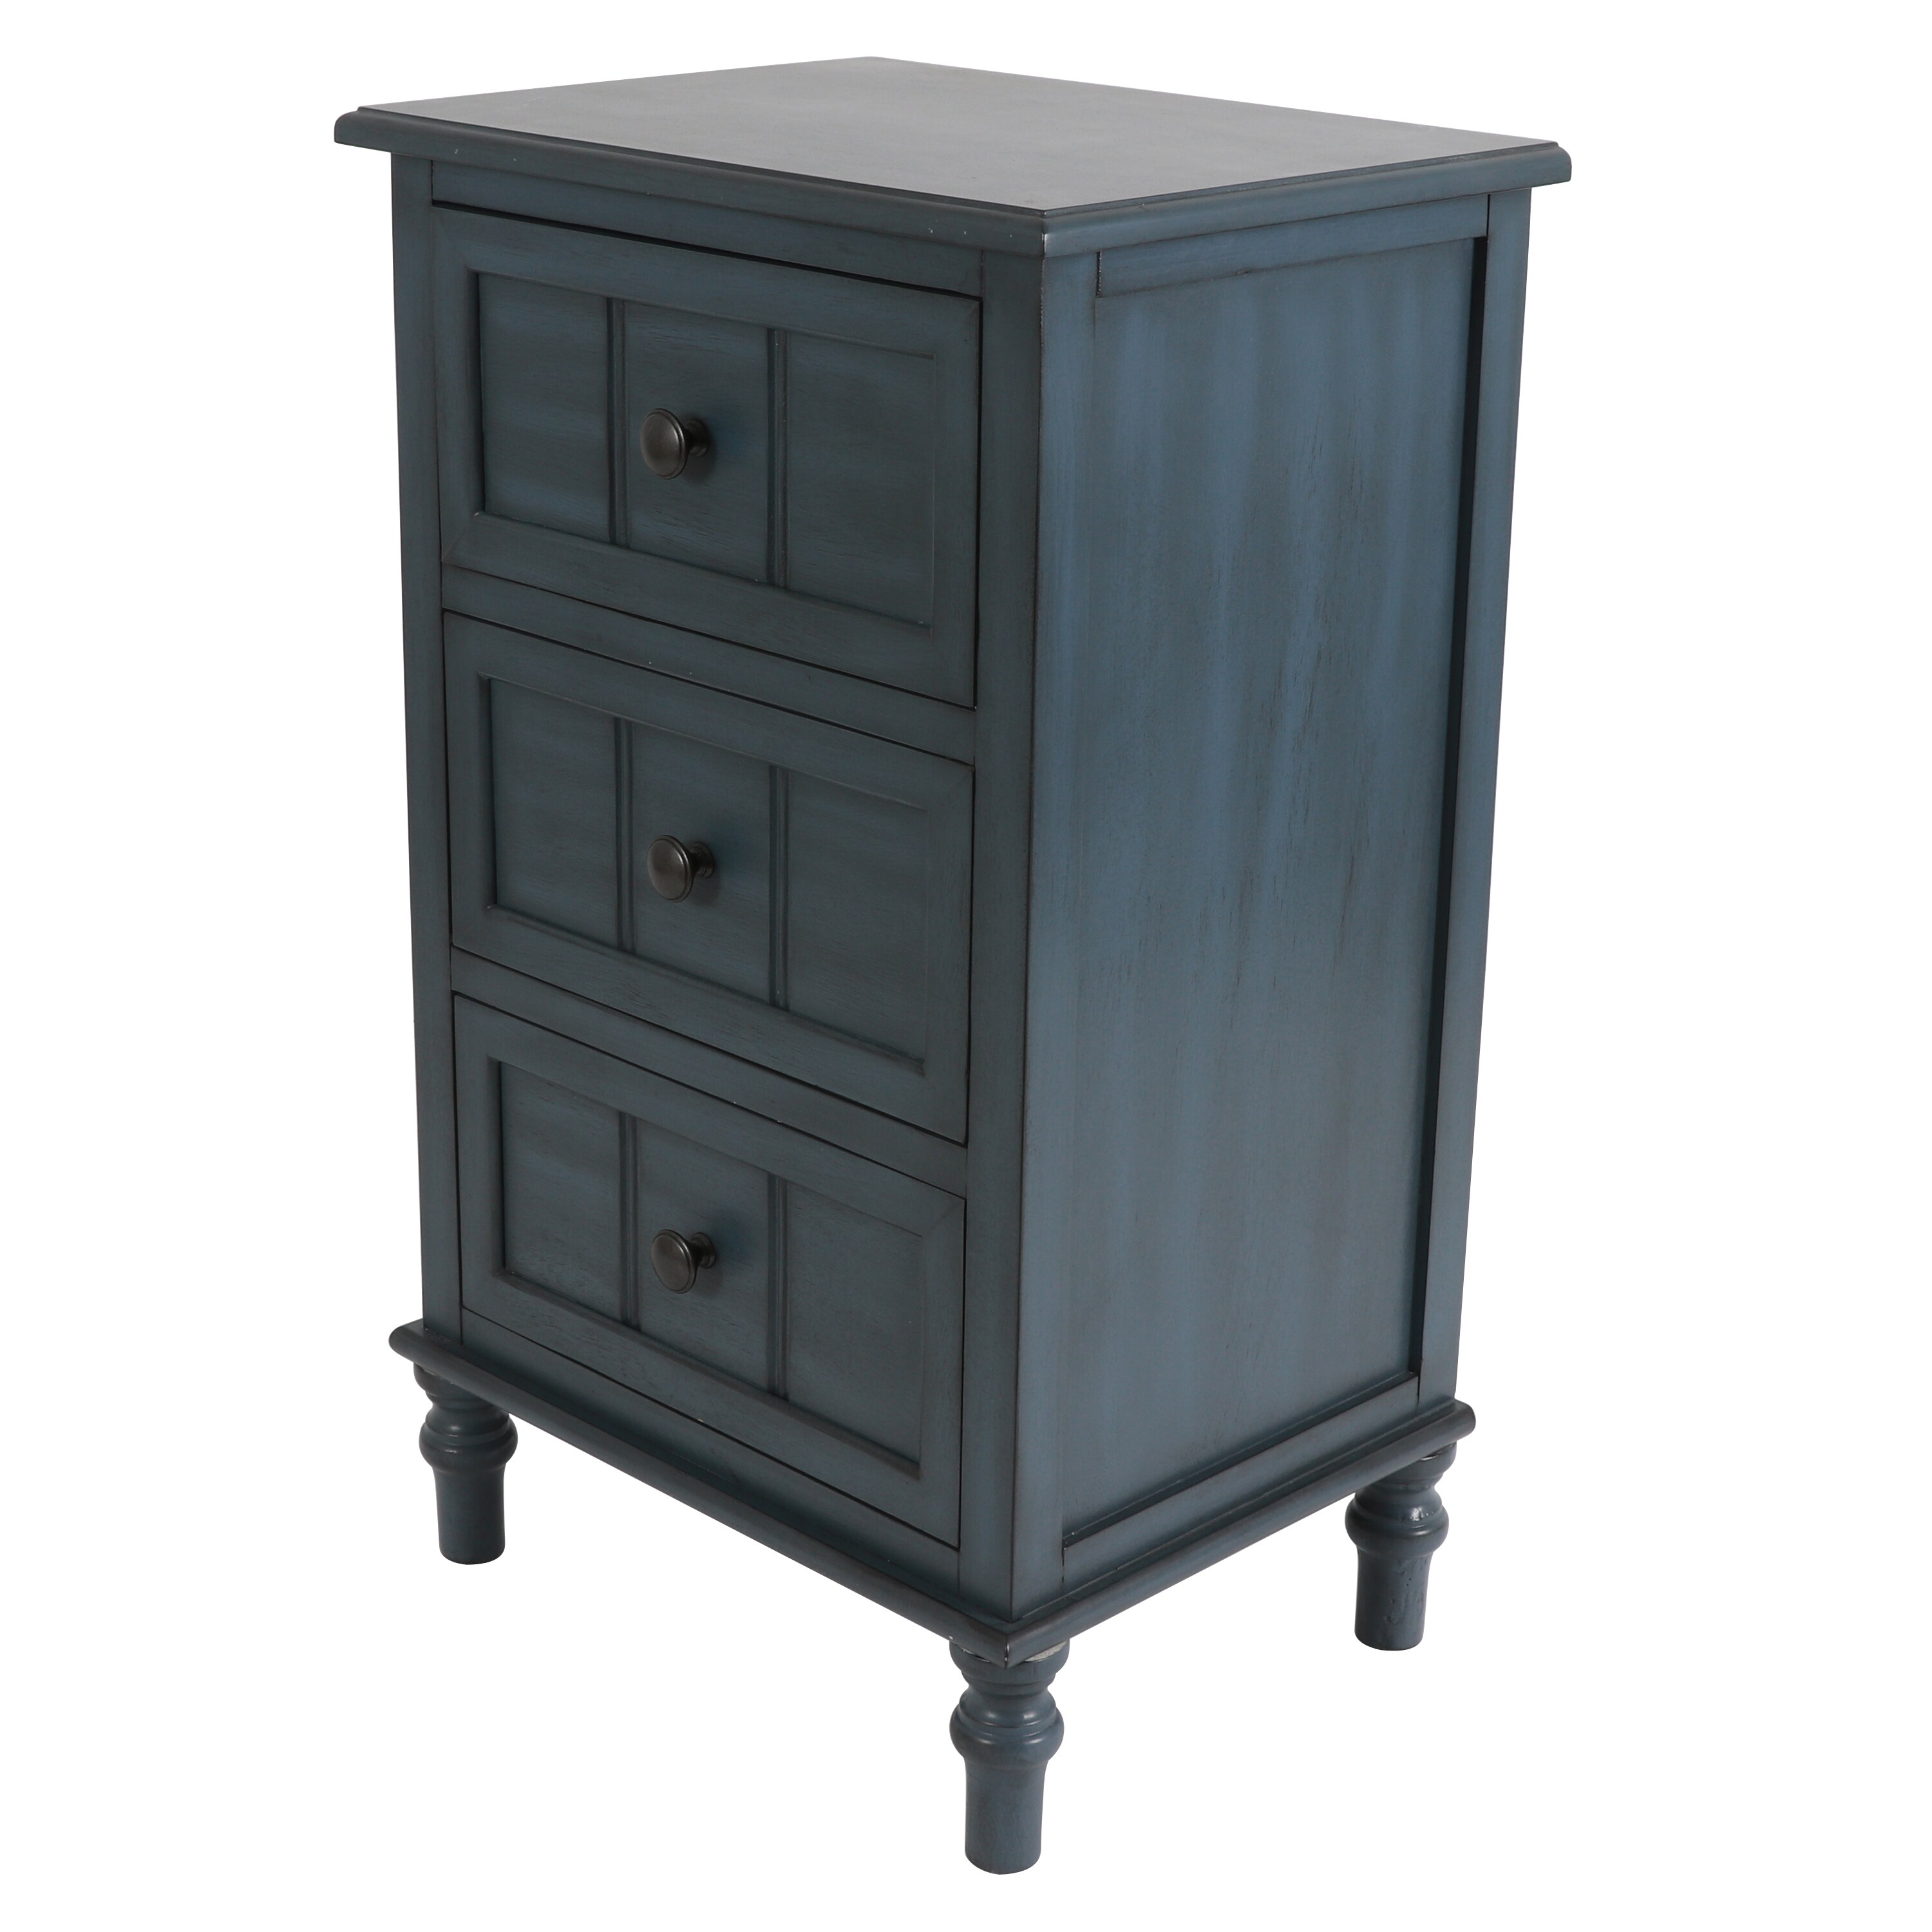 Decor Therapy Simplify Antique Navy Wood End Table with Storage